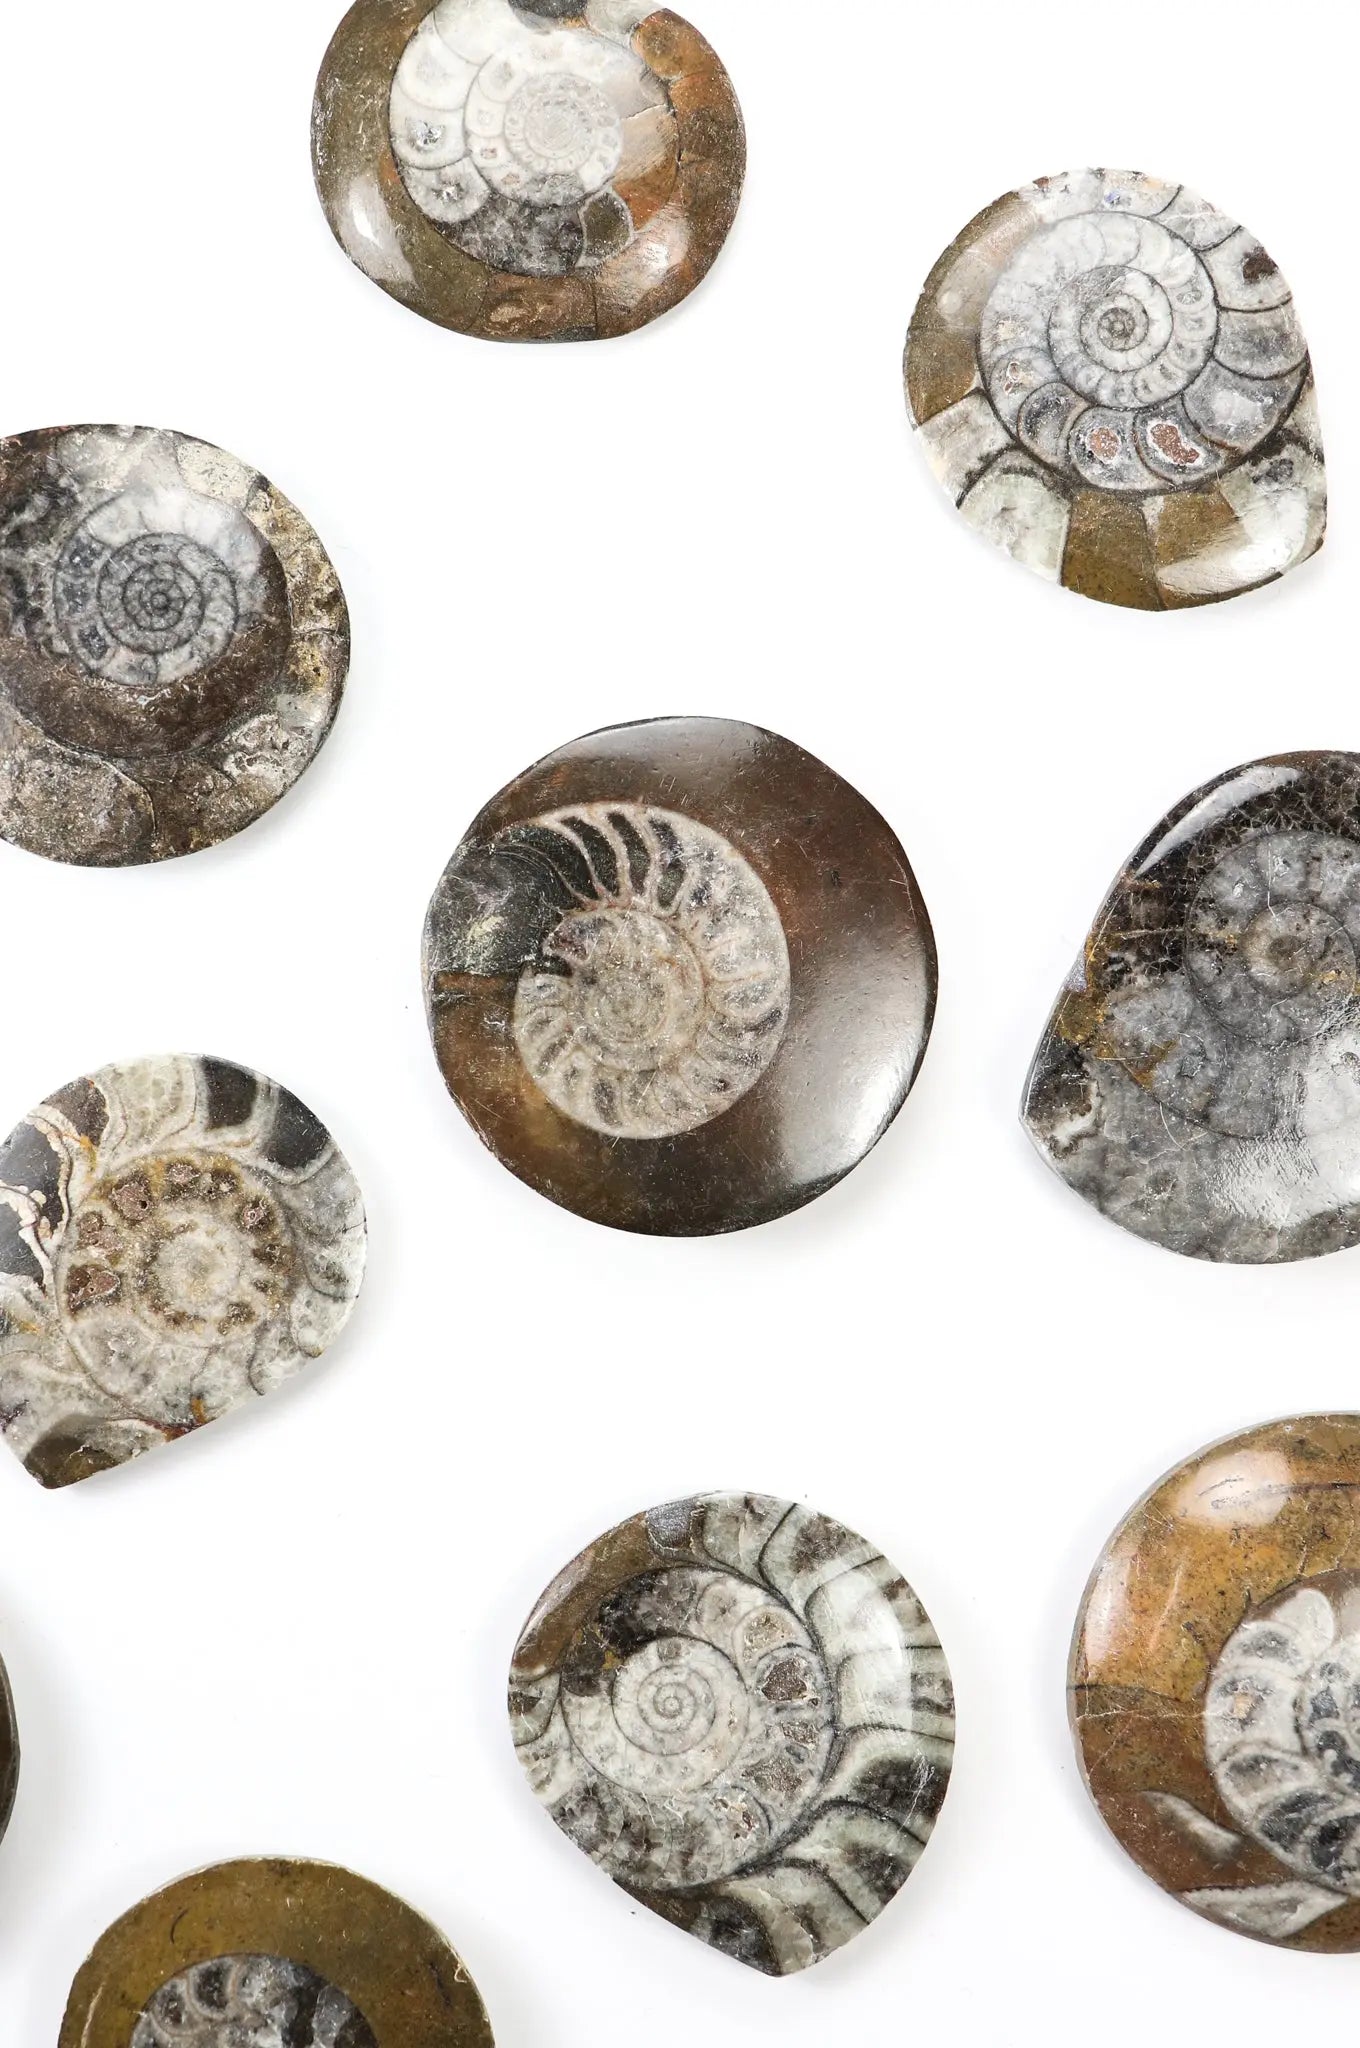 Goniatite Fossil - THE STEMCELL SCIENCE SHOP